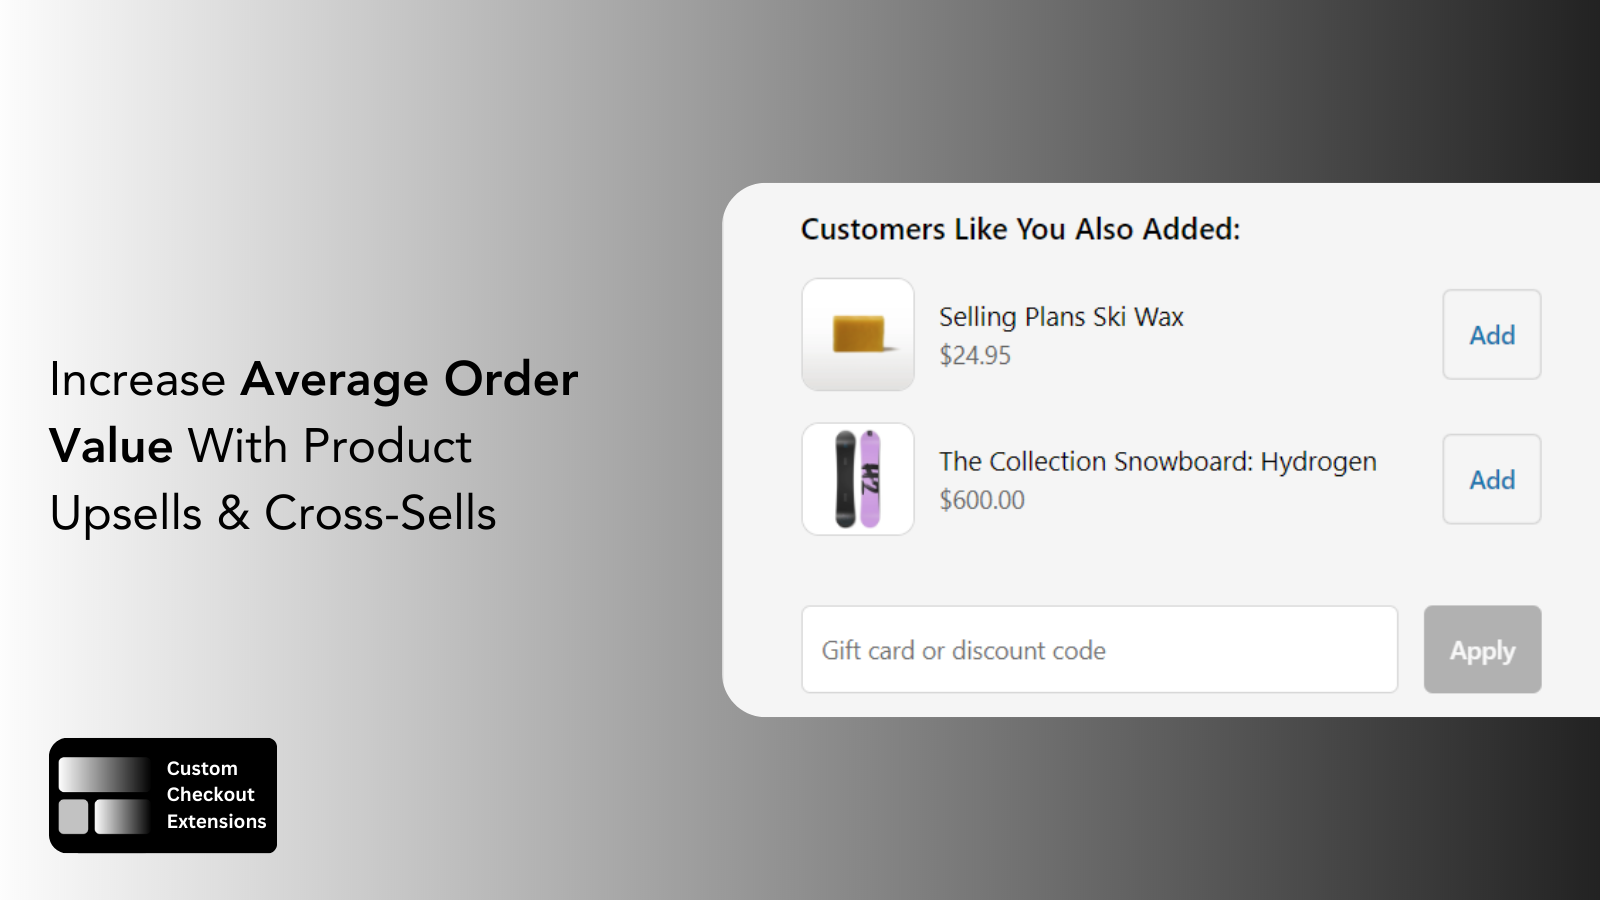 Increase average order value with product upsells & cross-sells